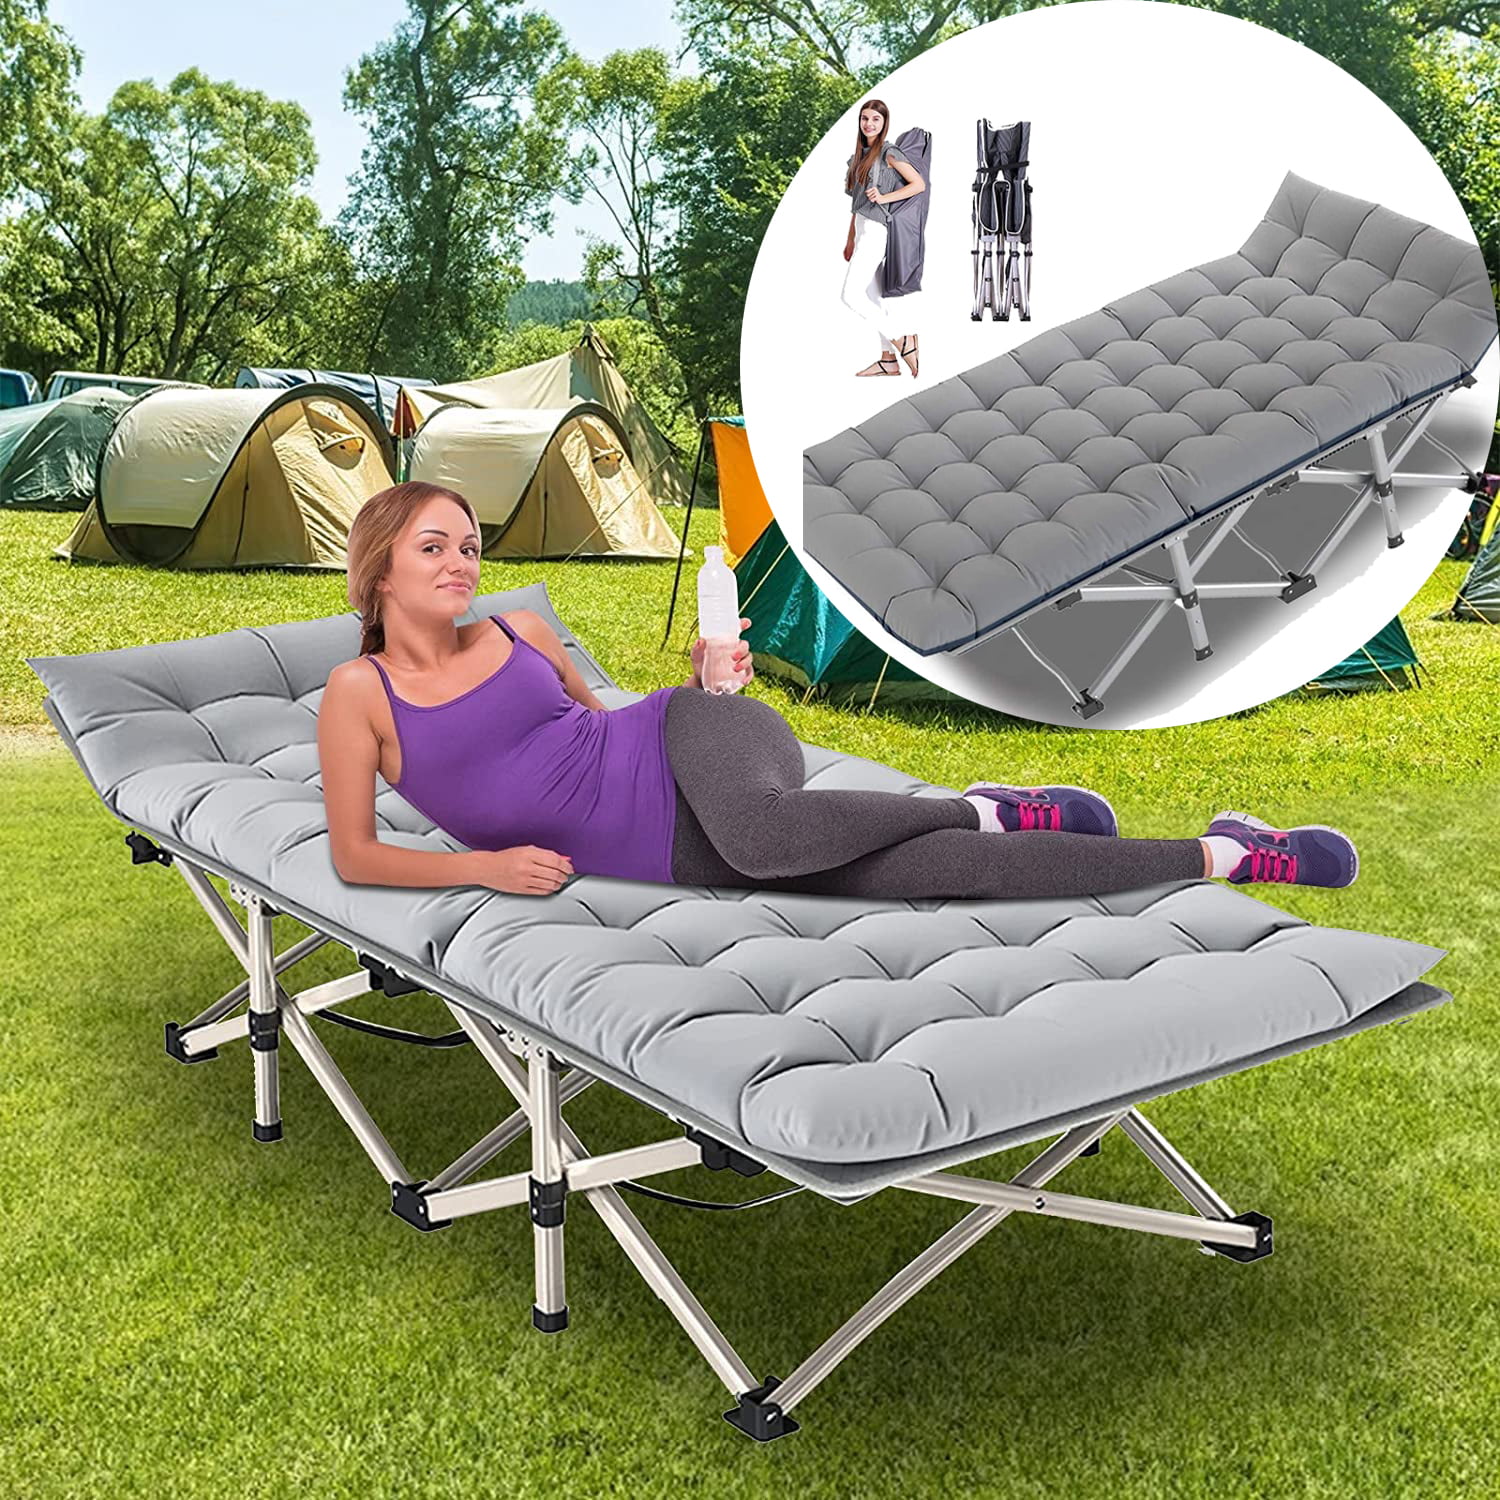 Camping Cot Coleman Outdoor Portable Folding Sleeping Gear Bed Camp Hiking Sleep 